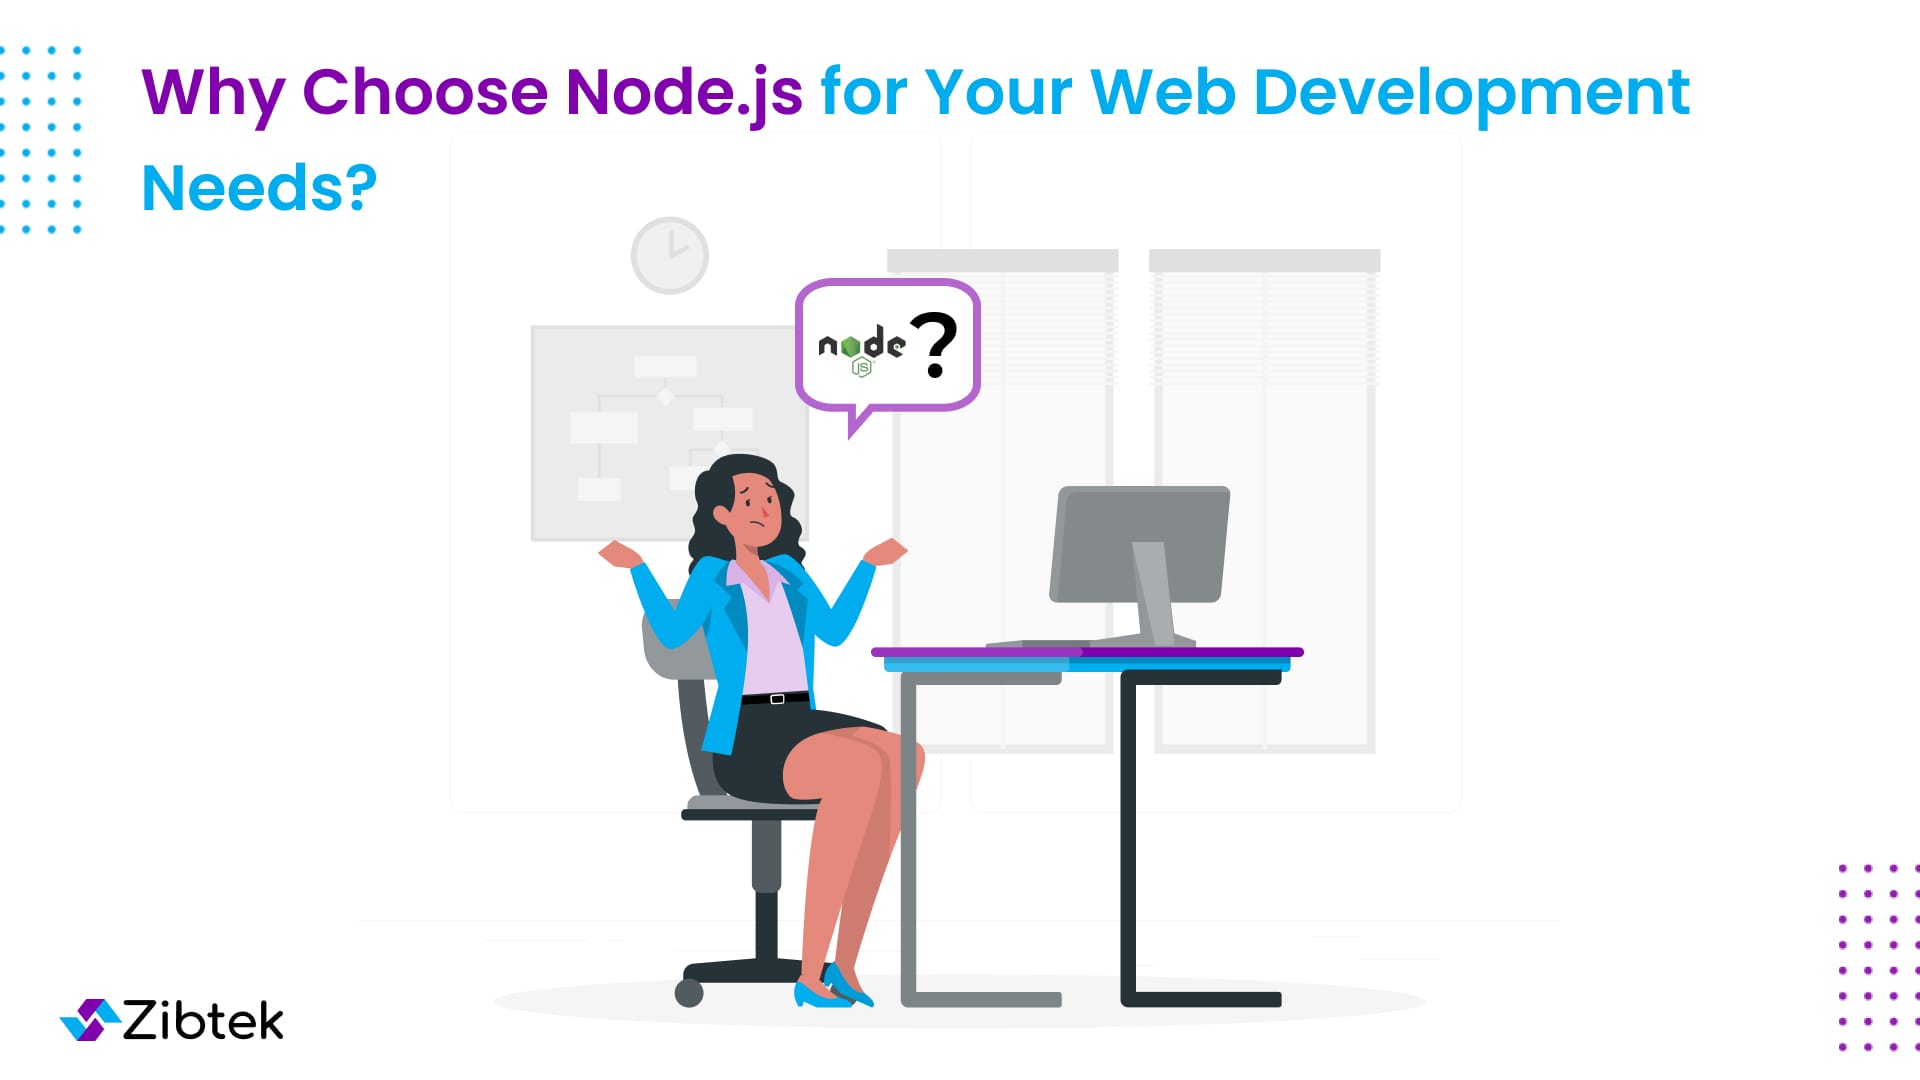 Why Choose Node.js for Your Web Development Needs?